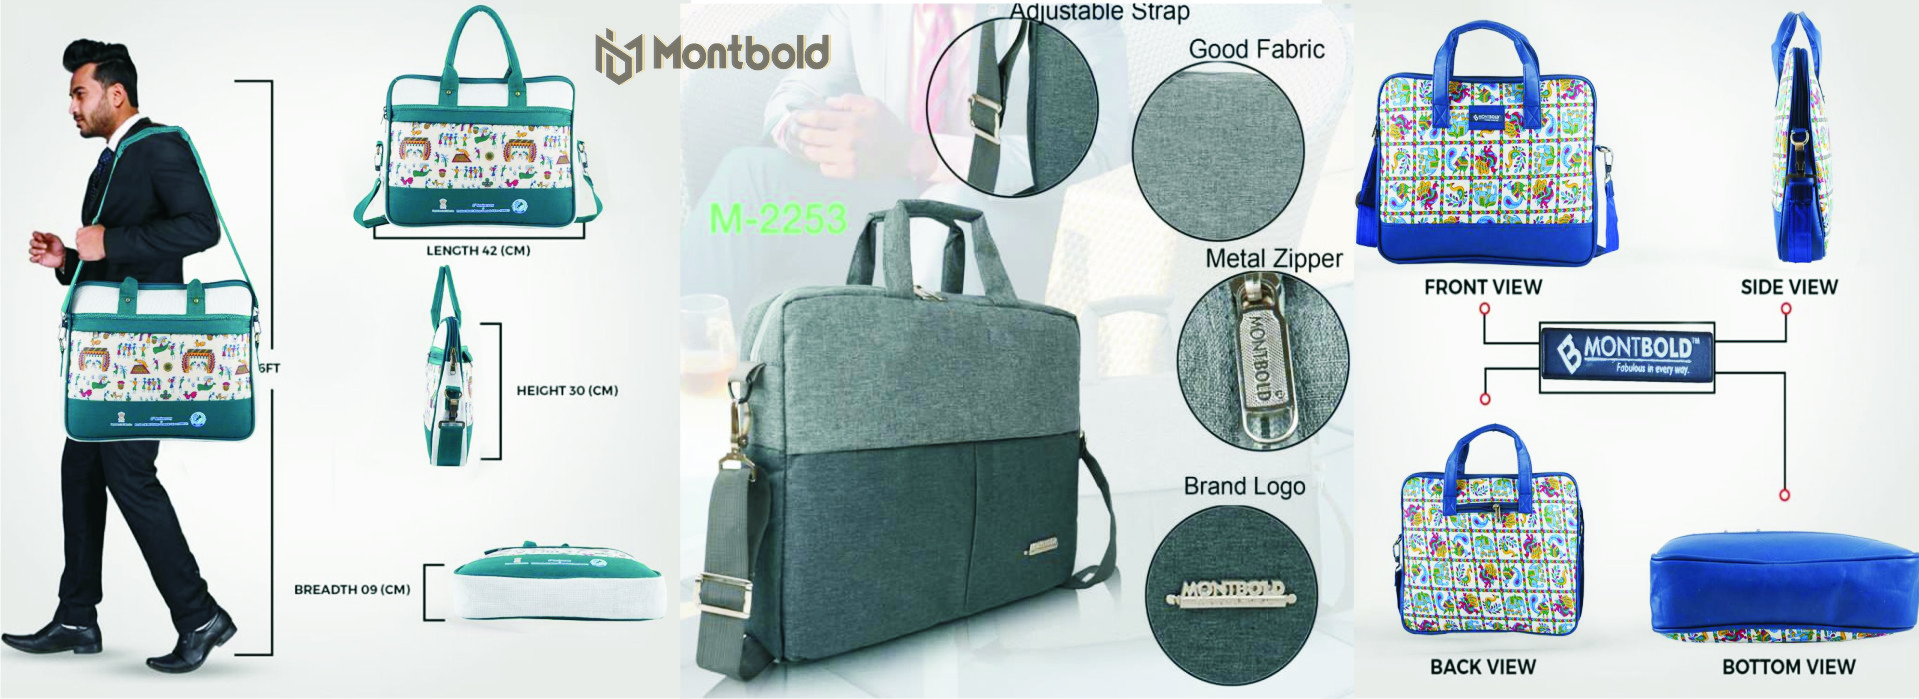 MONTBOLD BY GIFTCO EXPOTS